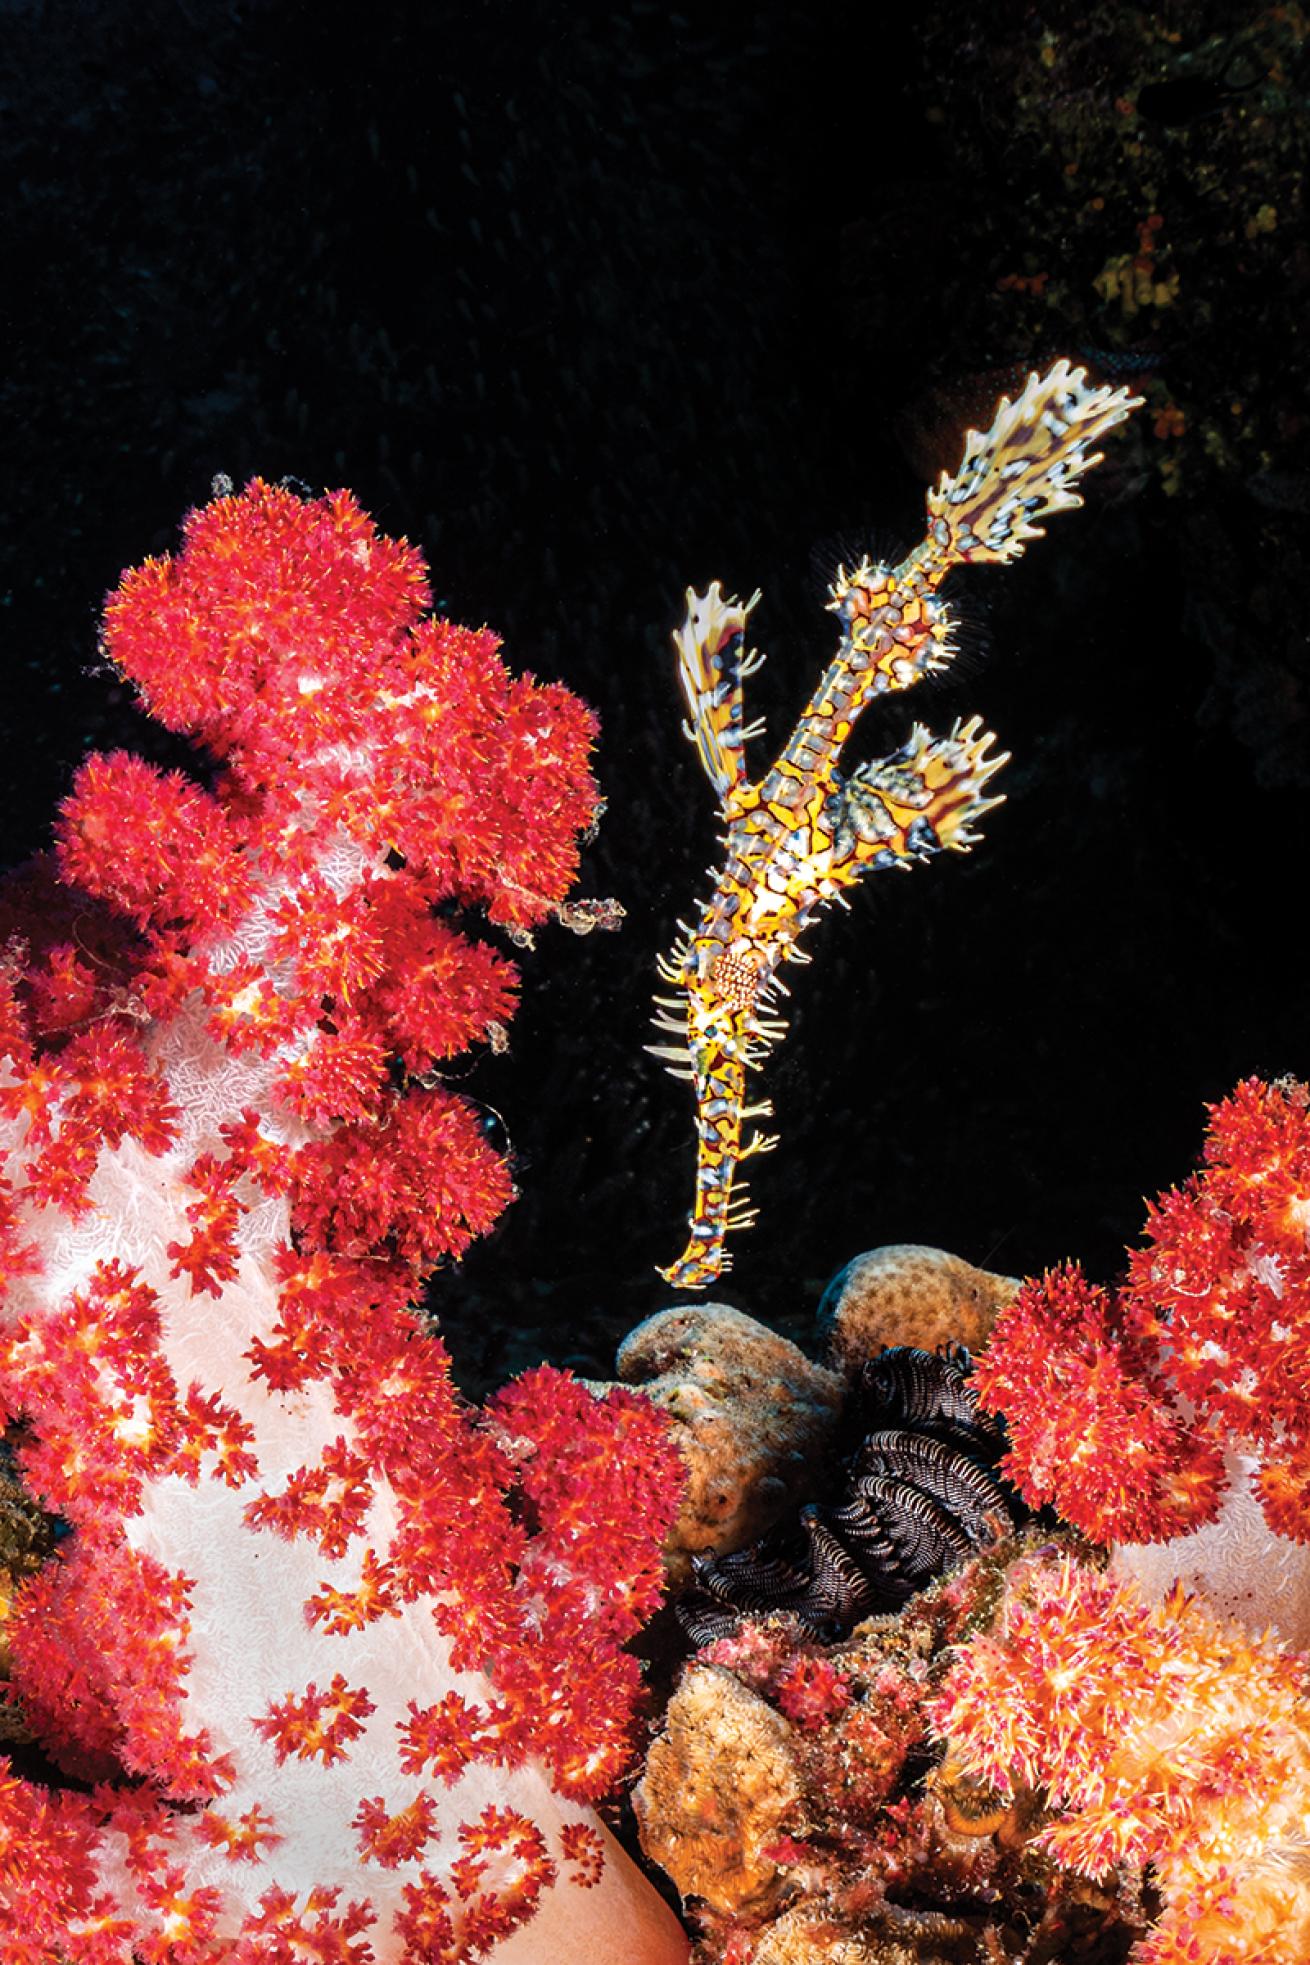 A ghost pipefish swims downward near pink coral.